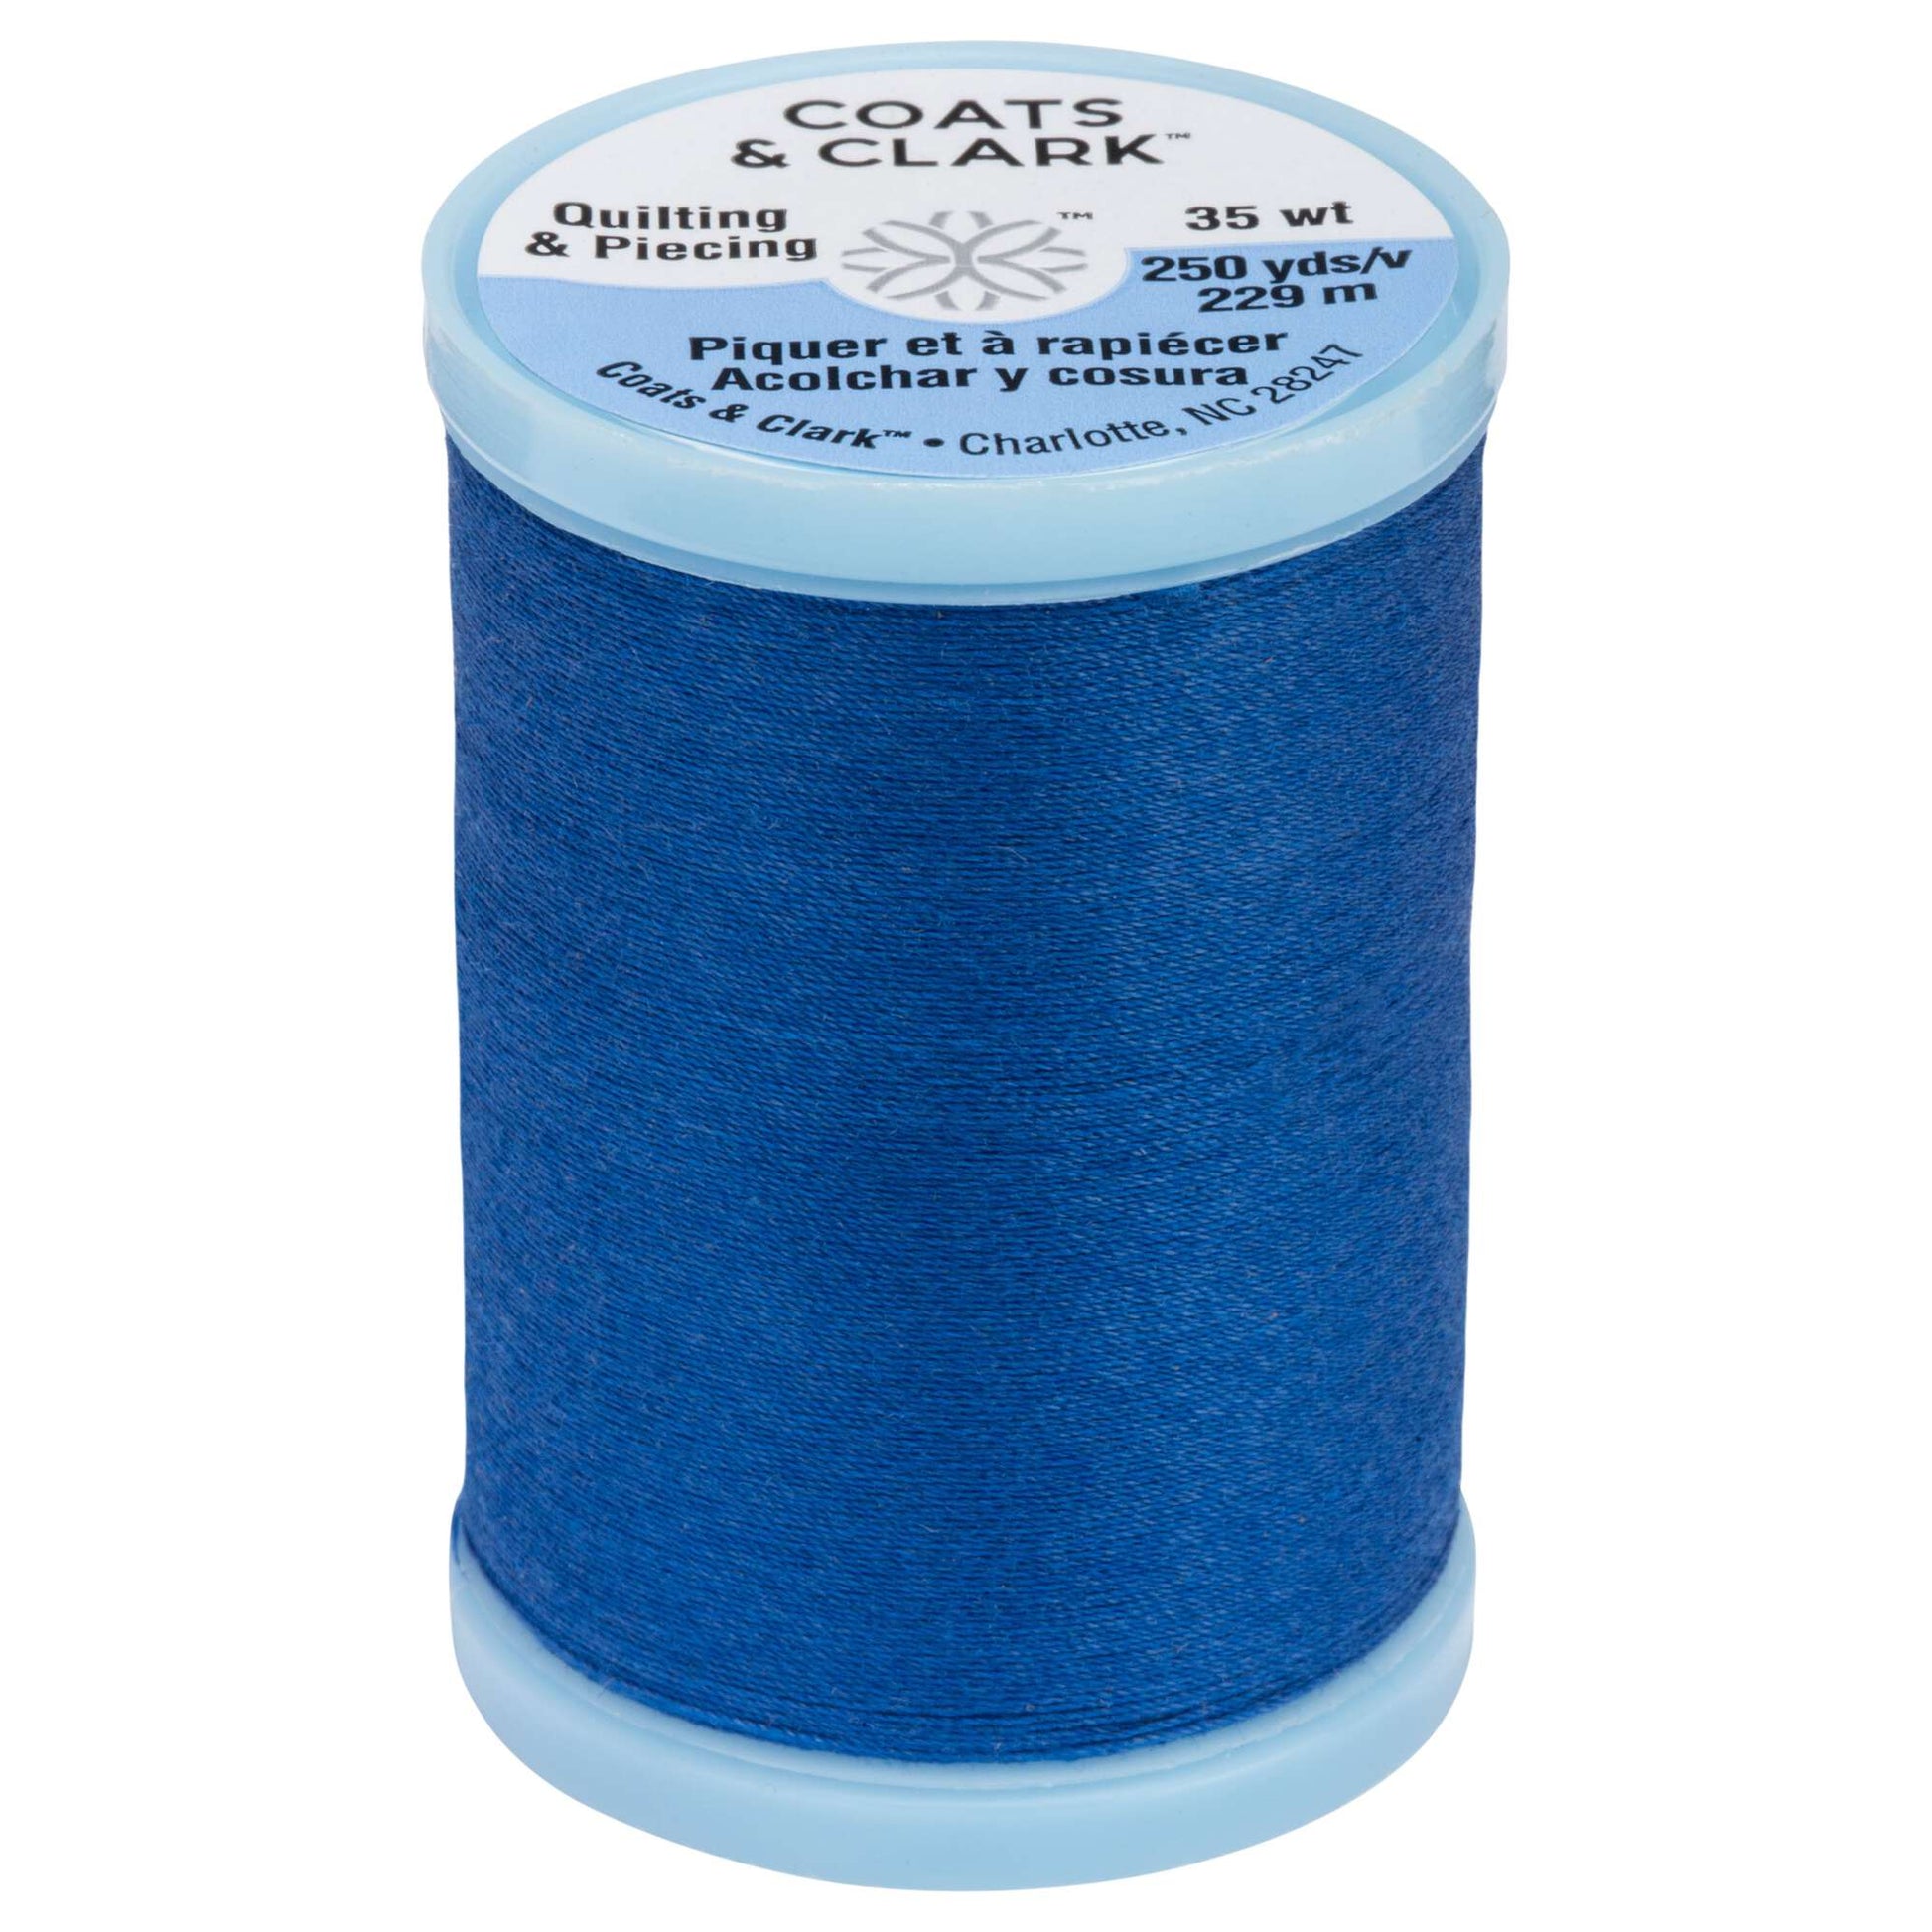 Coats & Clark Cotton Covered Quilting & Piecing Thread (250 Yards) Yale Blue